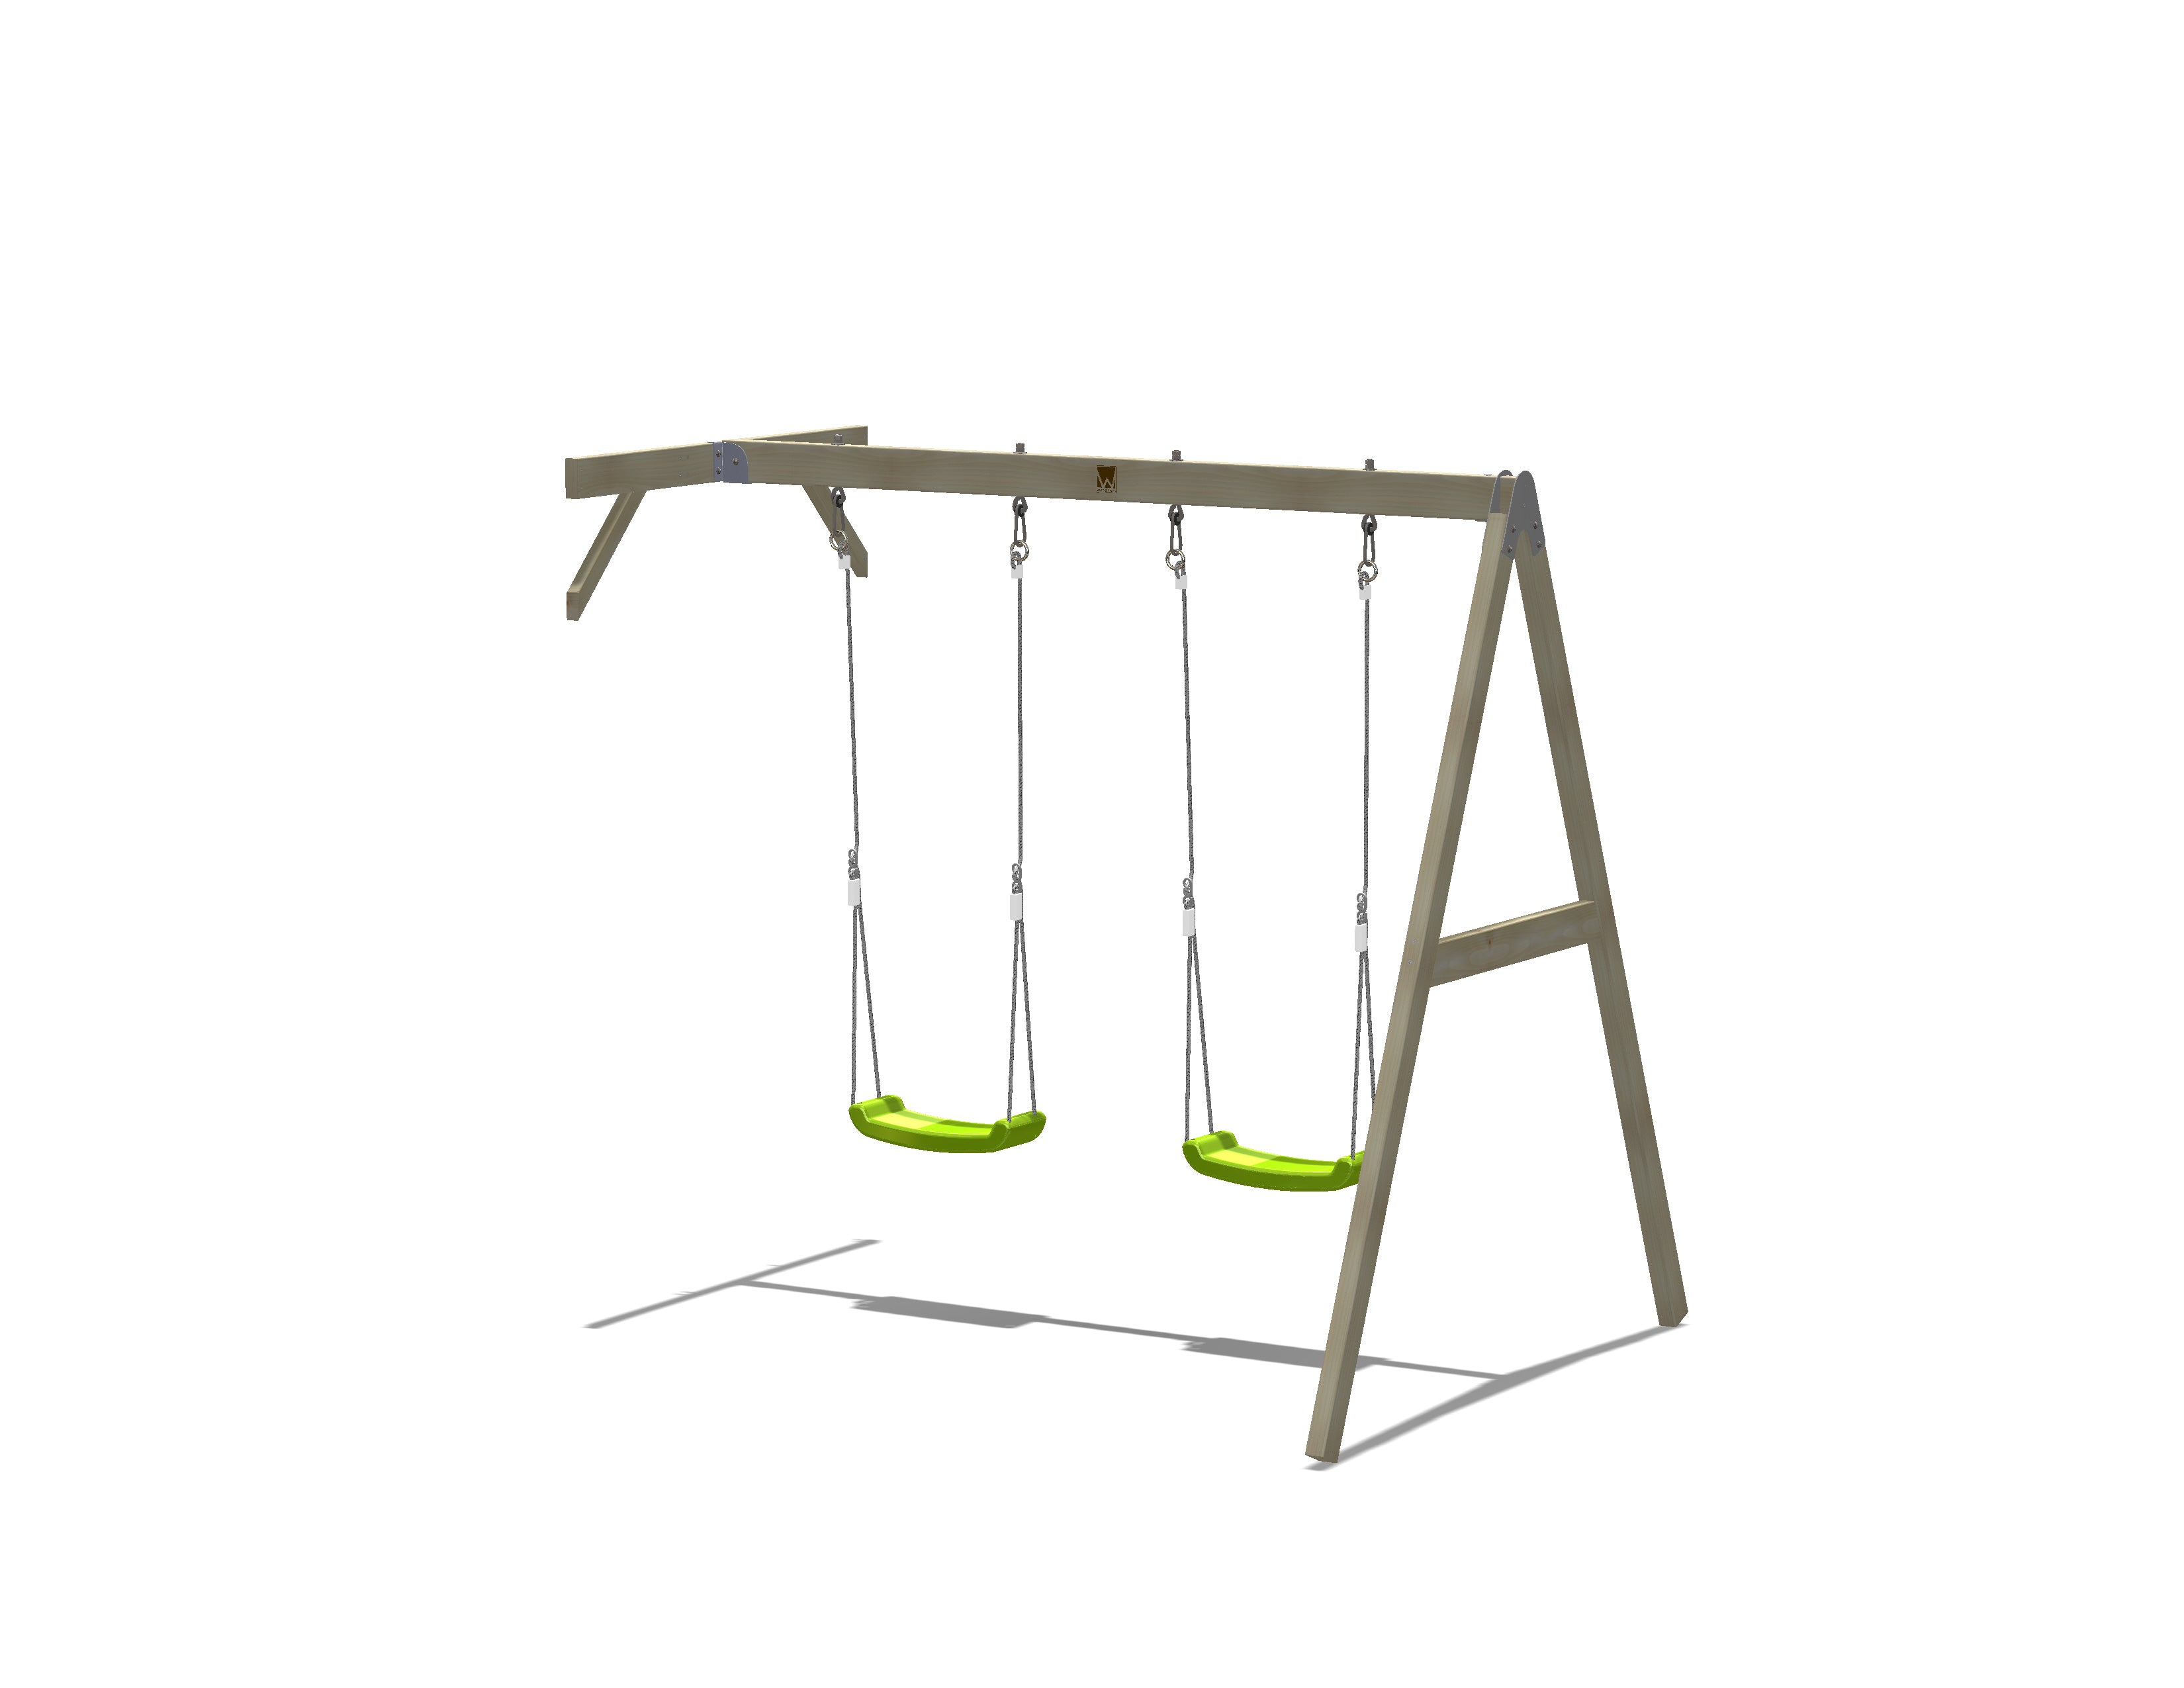 WE-729 Double Swing Attachment